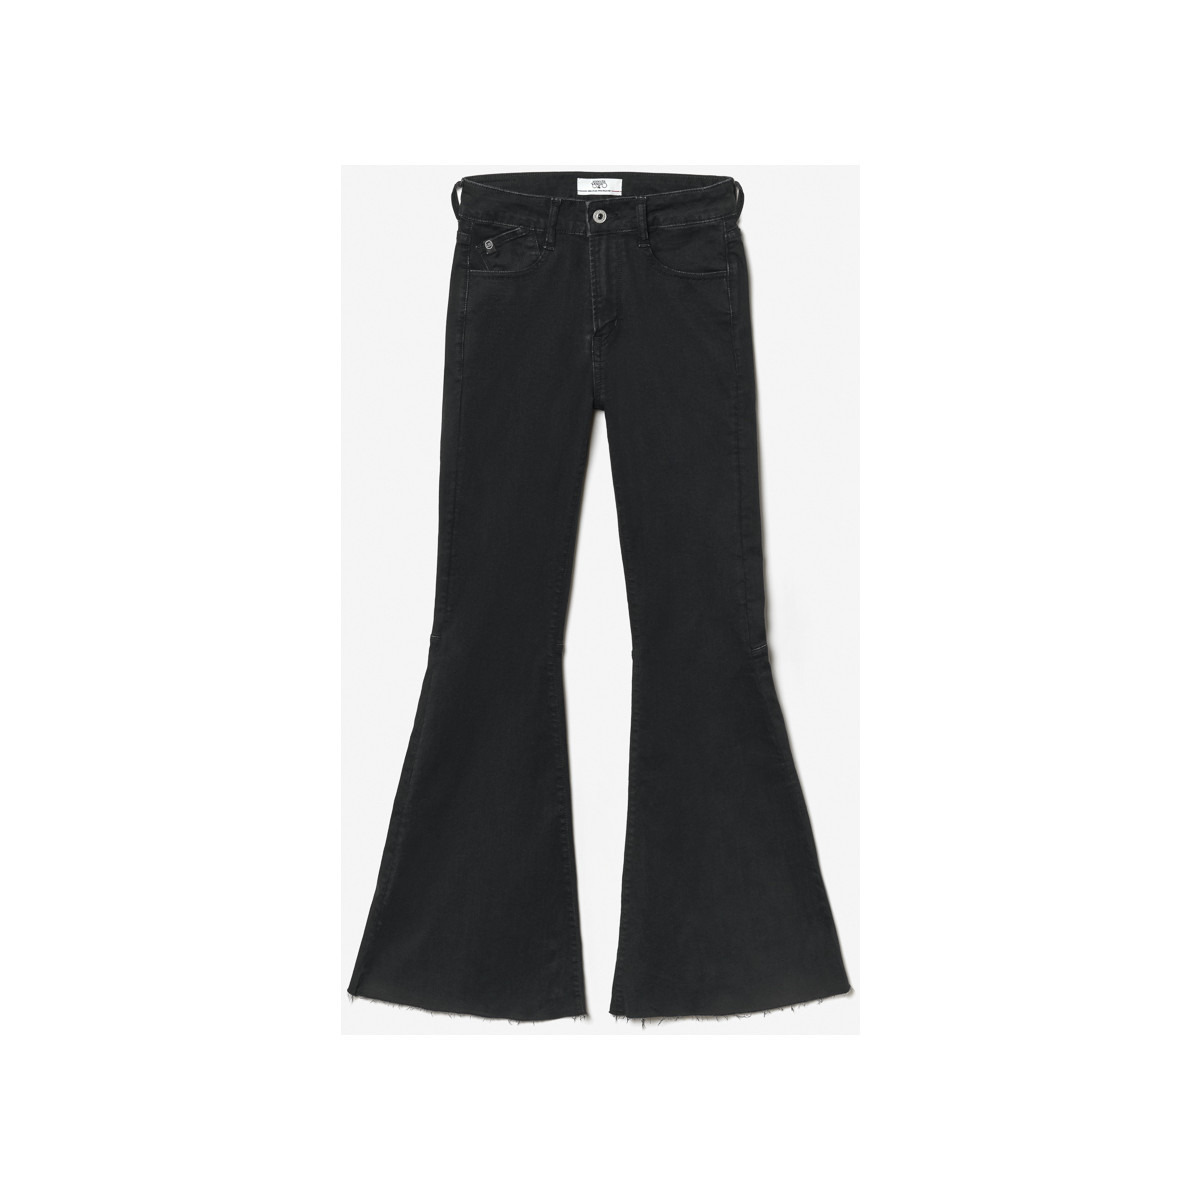 Black Jeans for Women at Spartoo GOOFASH